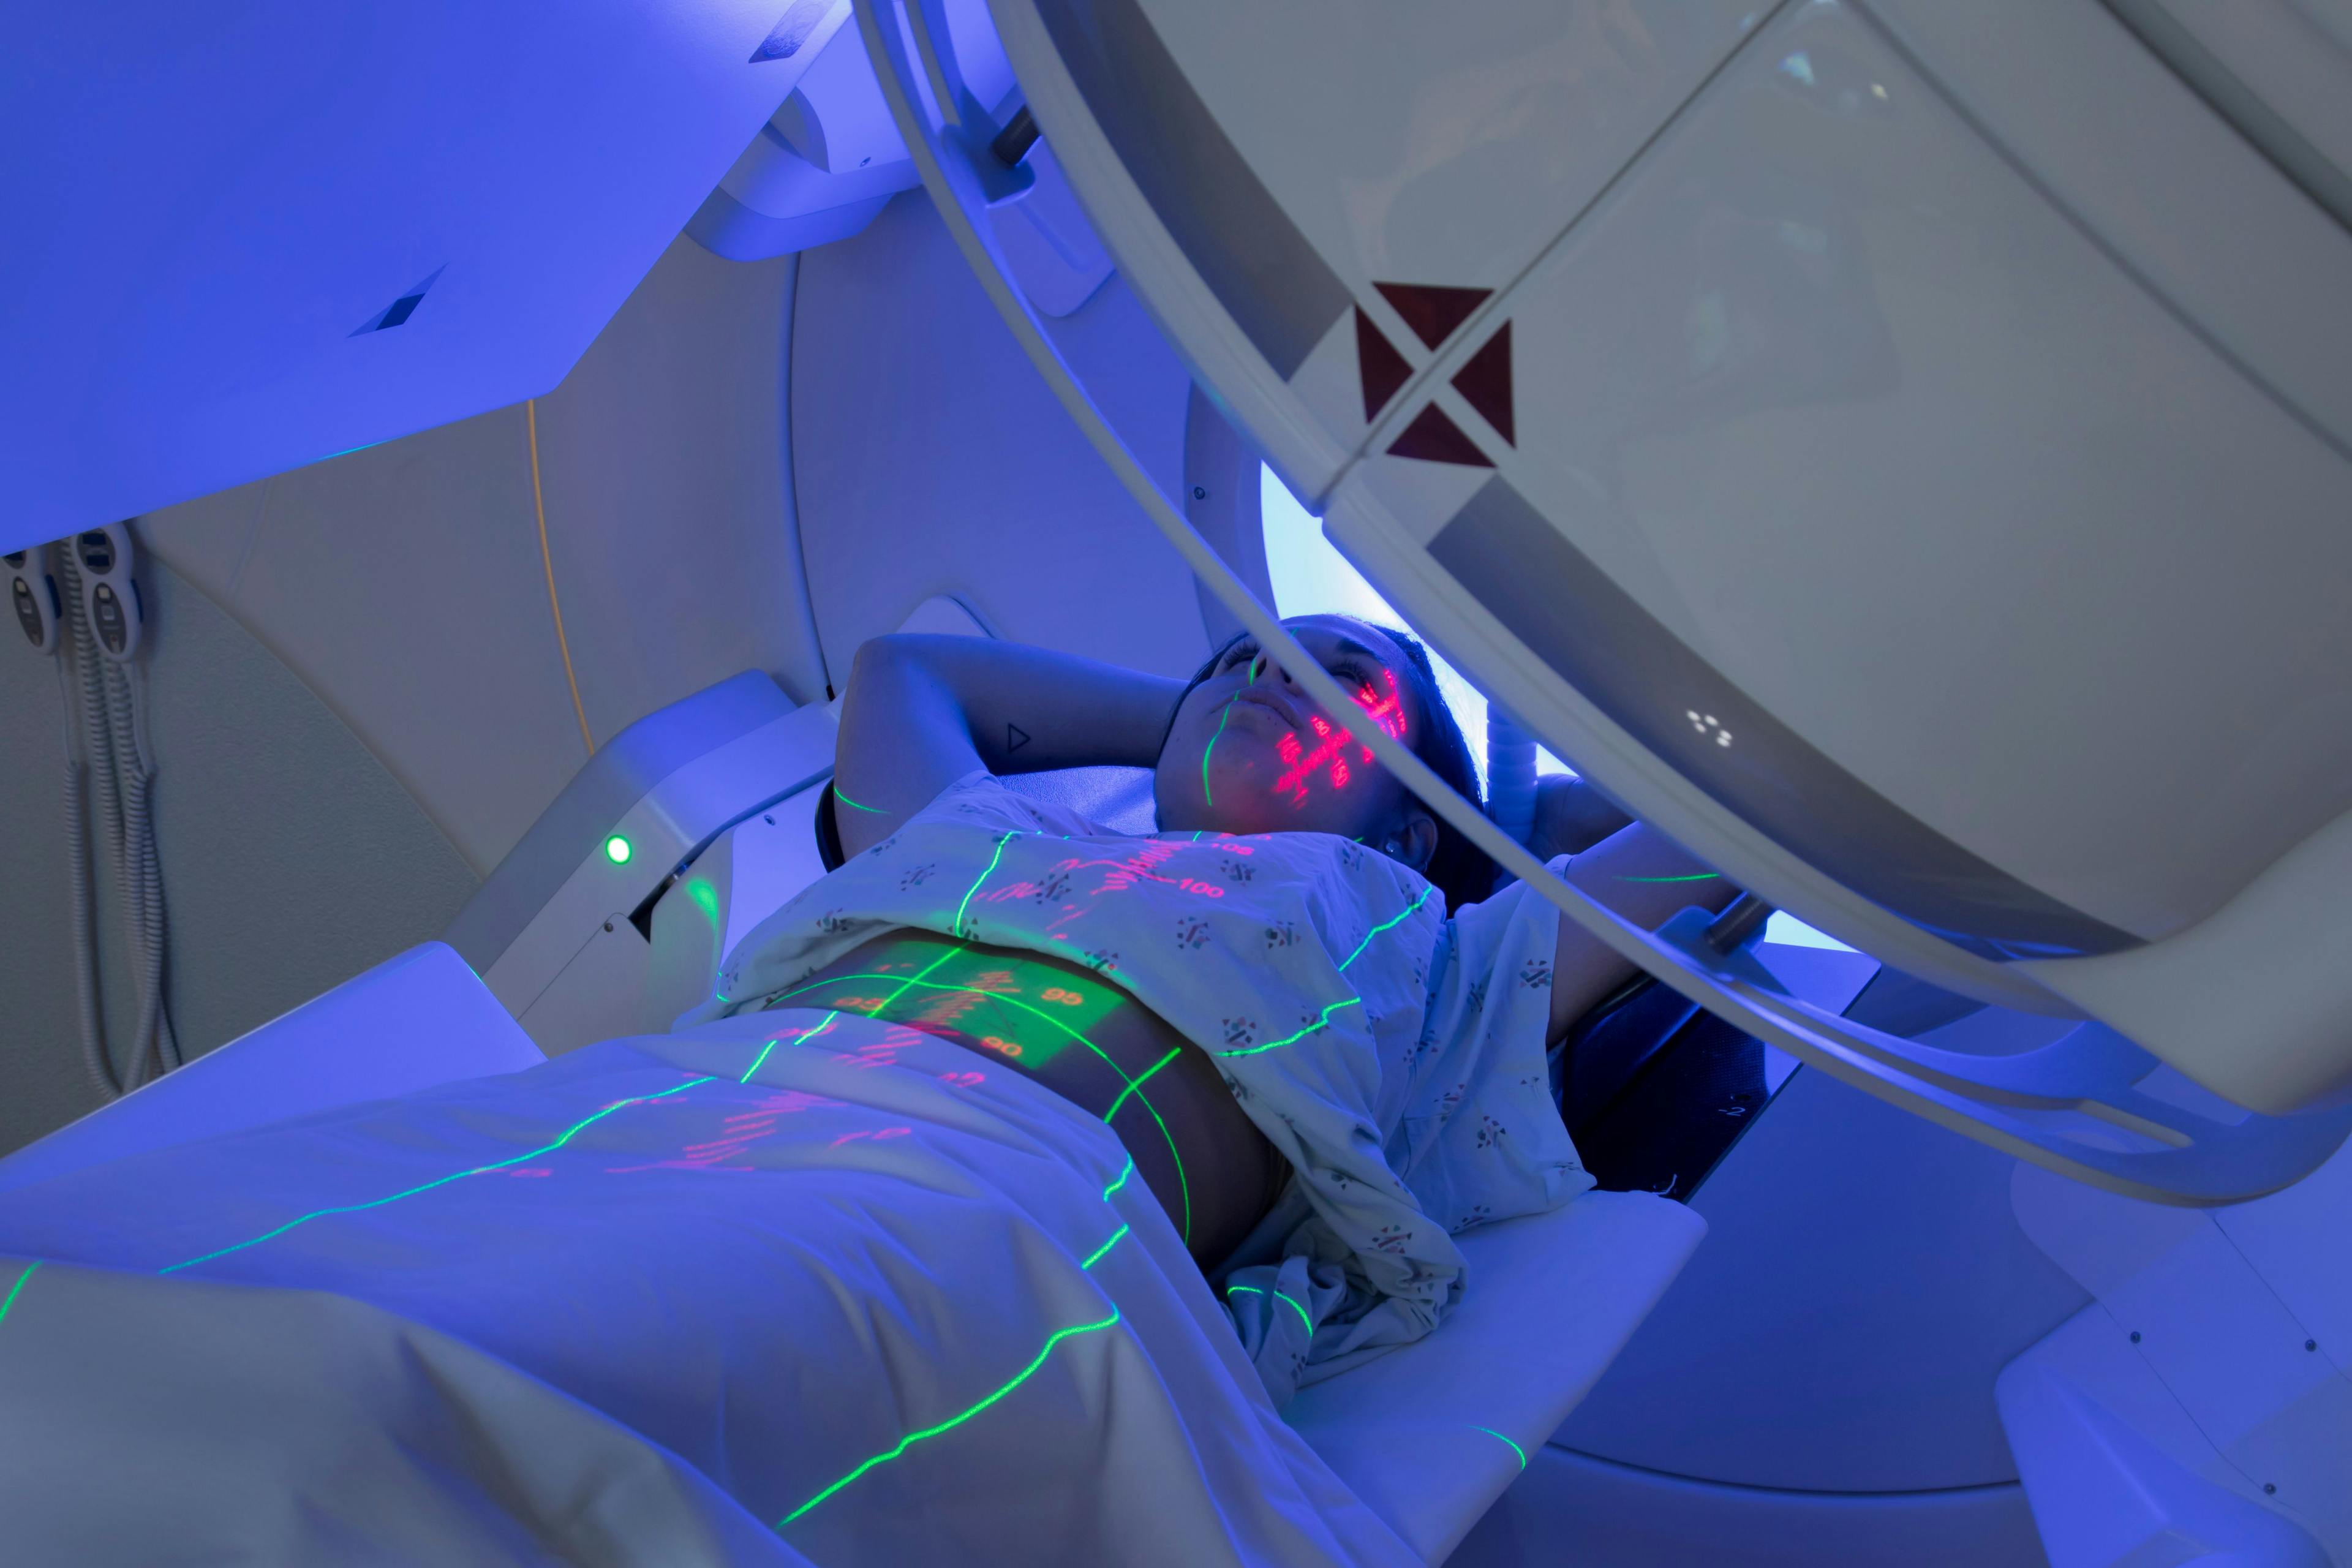 Woman Receiving Radiation Therapy/ Radiotherapy Treatments for Cancer | Image credit: © Mark Kostich © stock.adobe.com